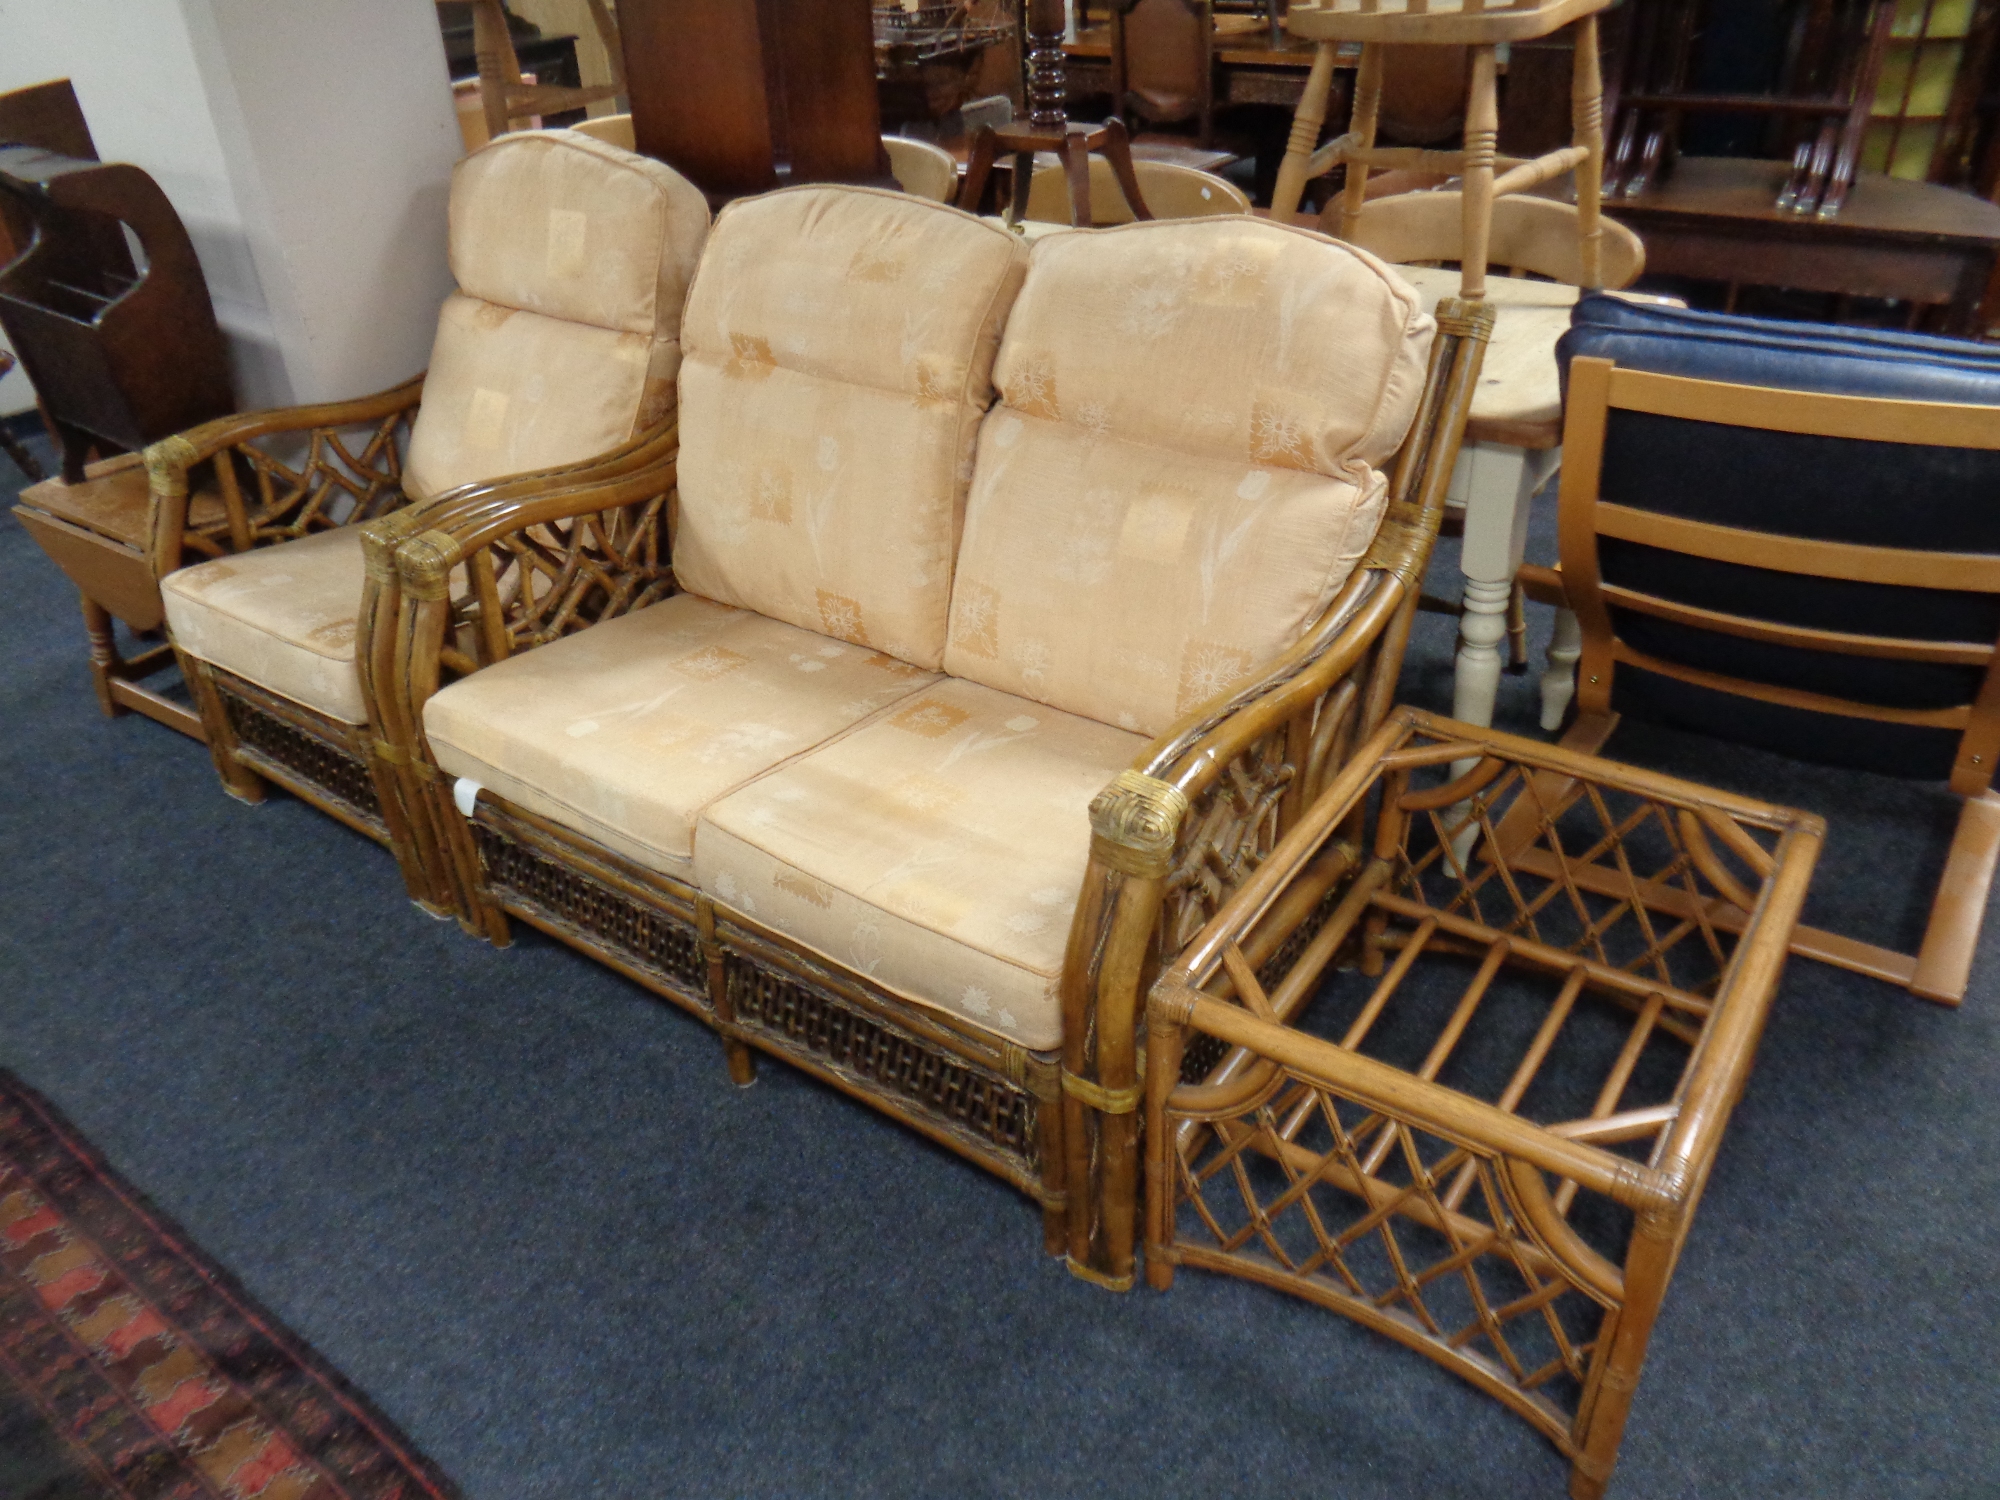 A bamboo and wicker two piece conservatory suite with matching coffee table (no glass)